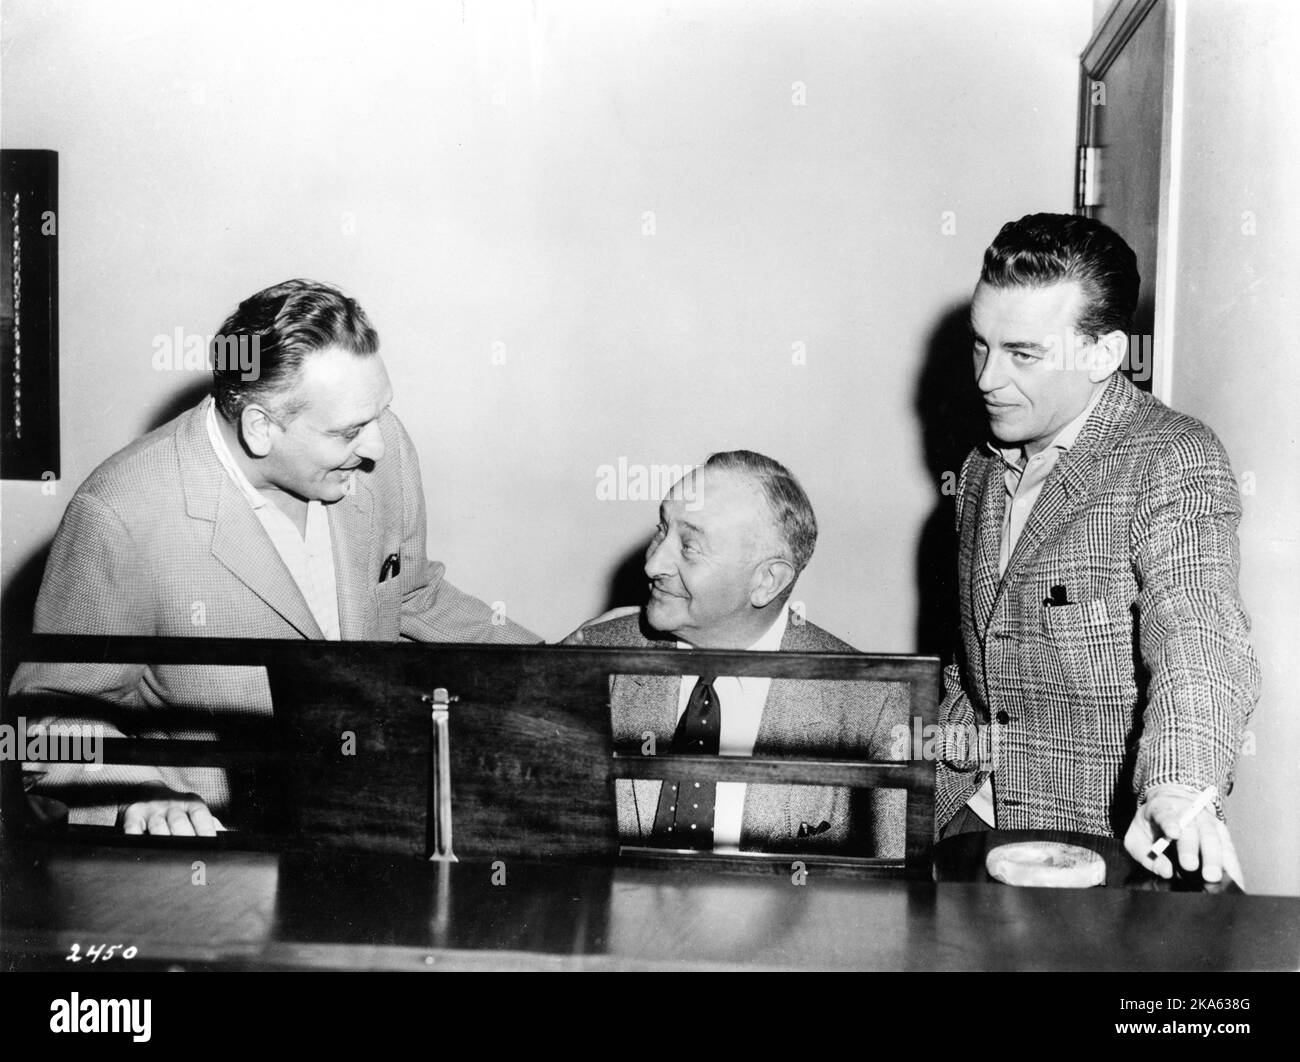 Producer ARTHER FREED at piano with songwriters FREDERICK LOEWE and ALAN JAY LERNER on set candid during production of GIGI 1958 director VINCENTE MINNELLI based on novella by Colette screenplay / lyrics Alan Jay Lerner music Frederick Loewe Metro Goldwyn Mayer Stock Photo